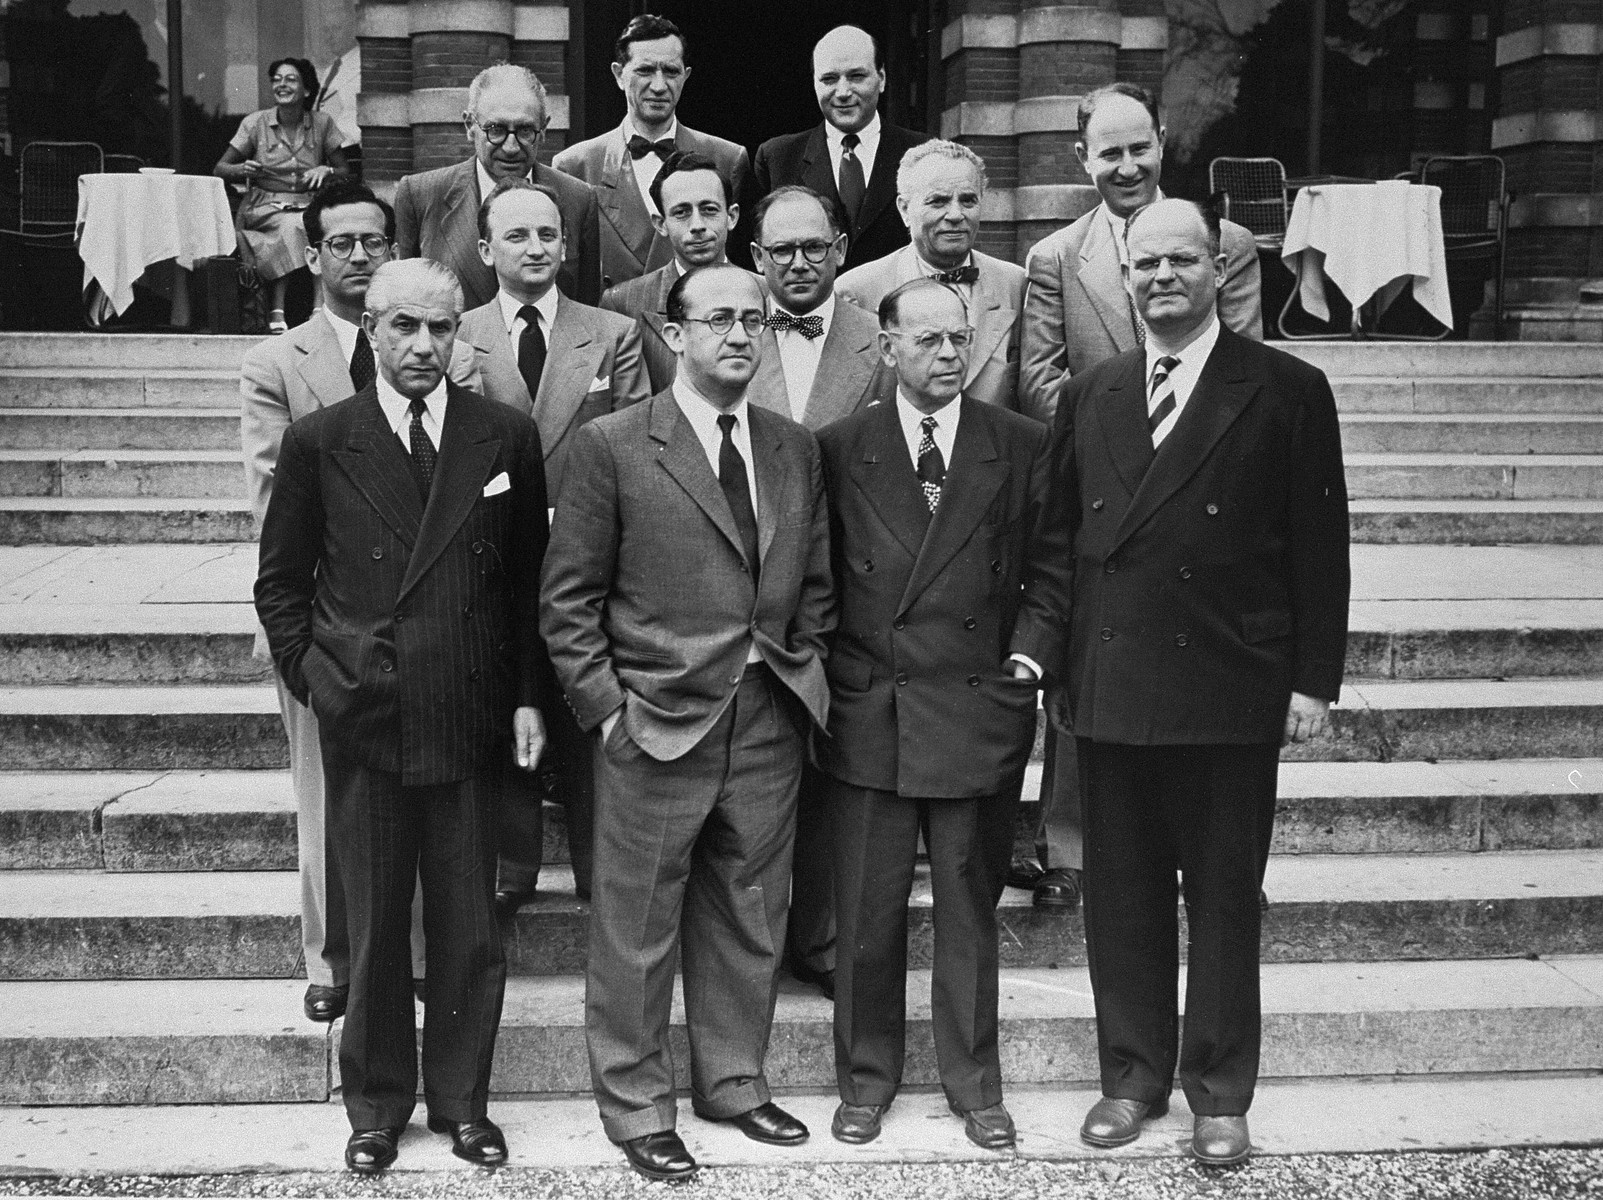 Group portrait of members of the Conference on Jewish Material Claims that came to Luxembourg for the signing of the Reparations Agreement between the German Federal Republic, the State of Israel, and the Conference on Jewish Material Claims. 

Among those pictured is Benjamin Ferencz (second row from the front, second from the left).